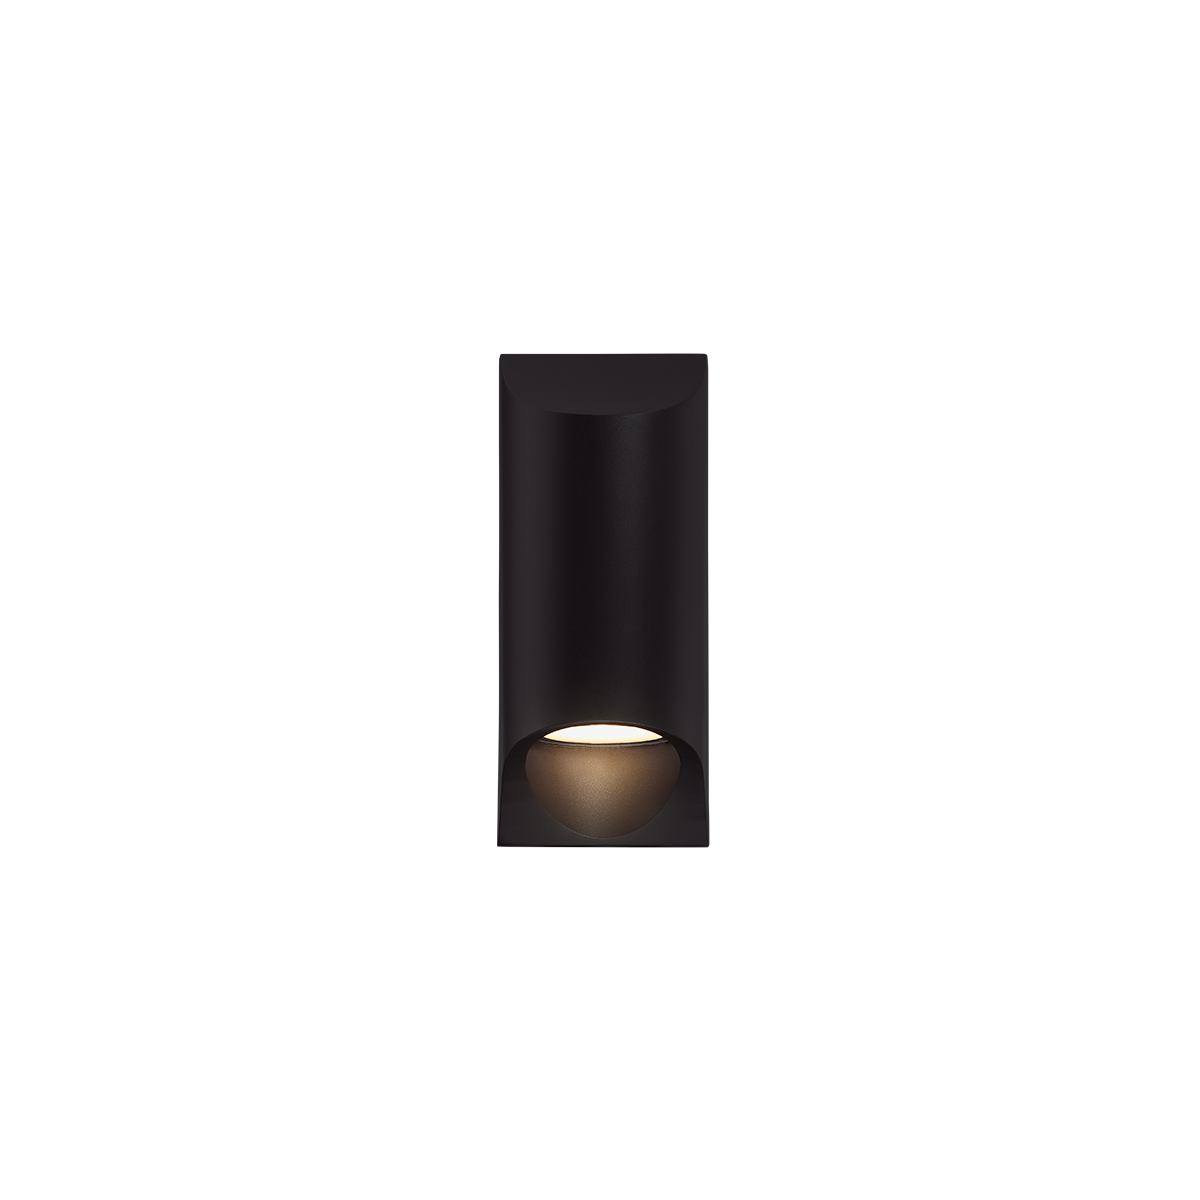 Modern Forms Mega Outdoor Wall Sconce Light